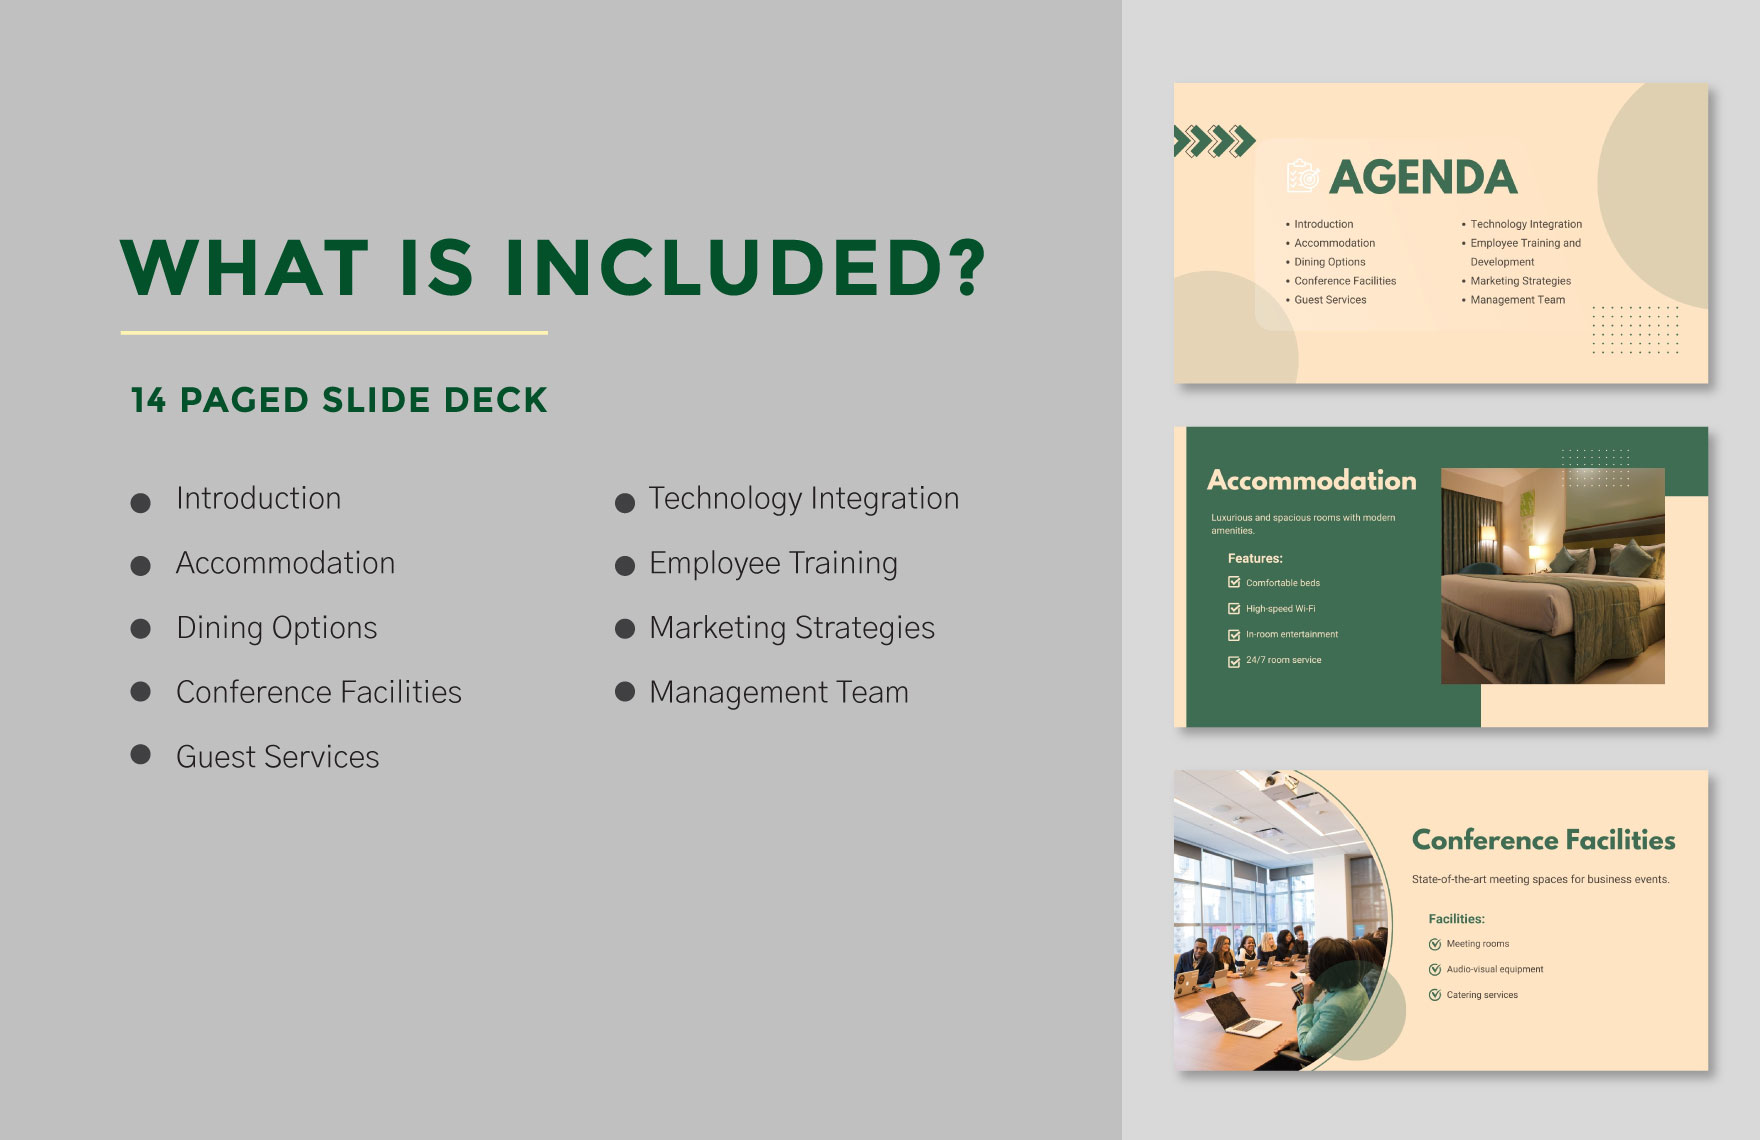 Hotel Management Template